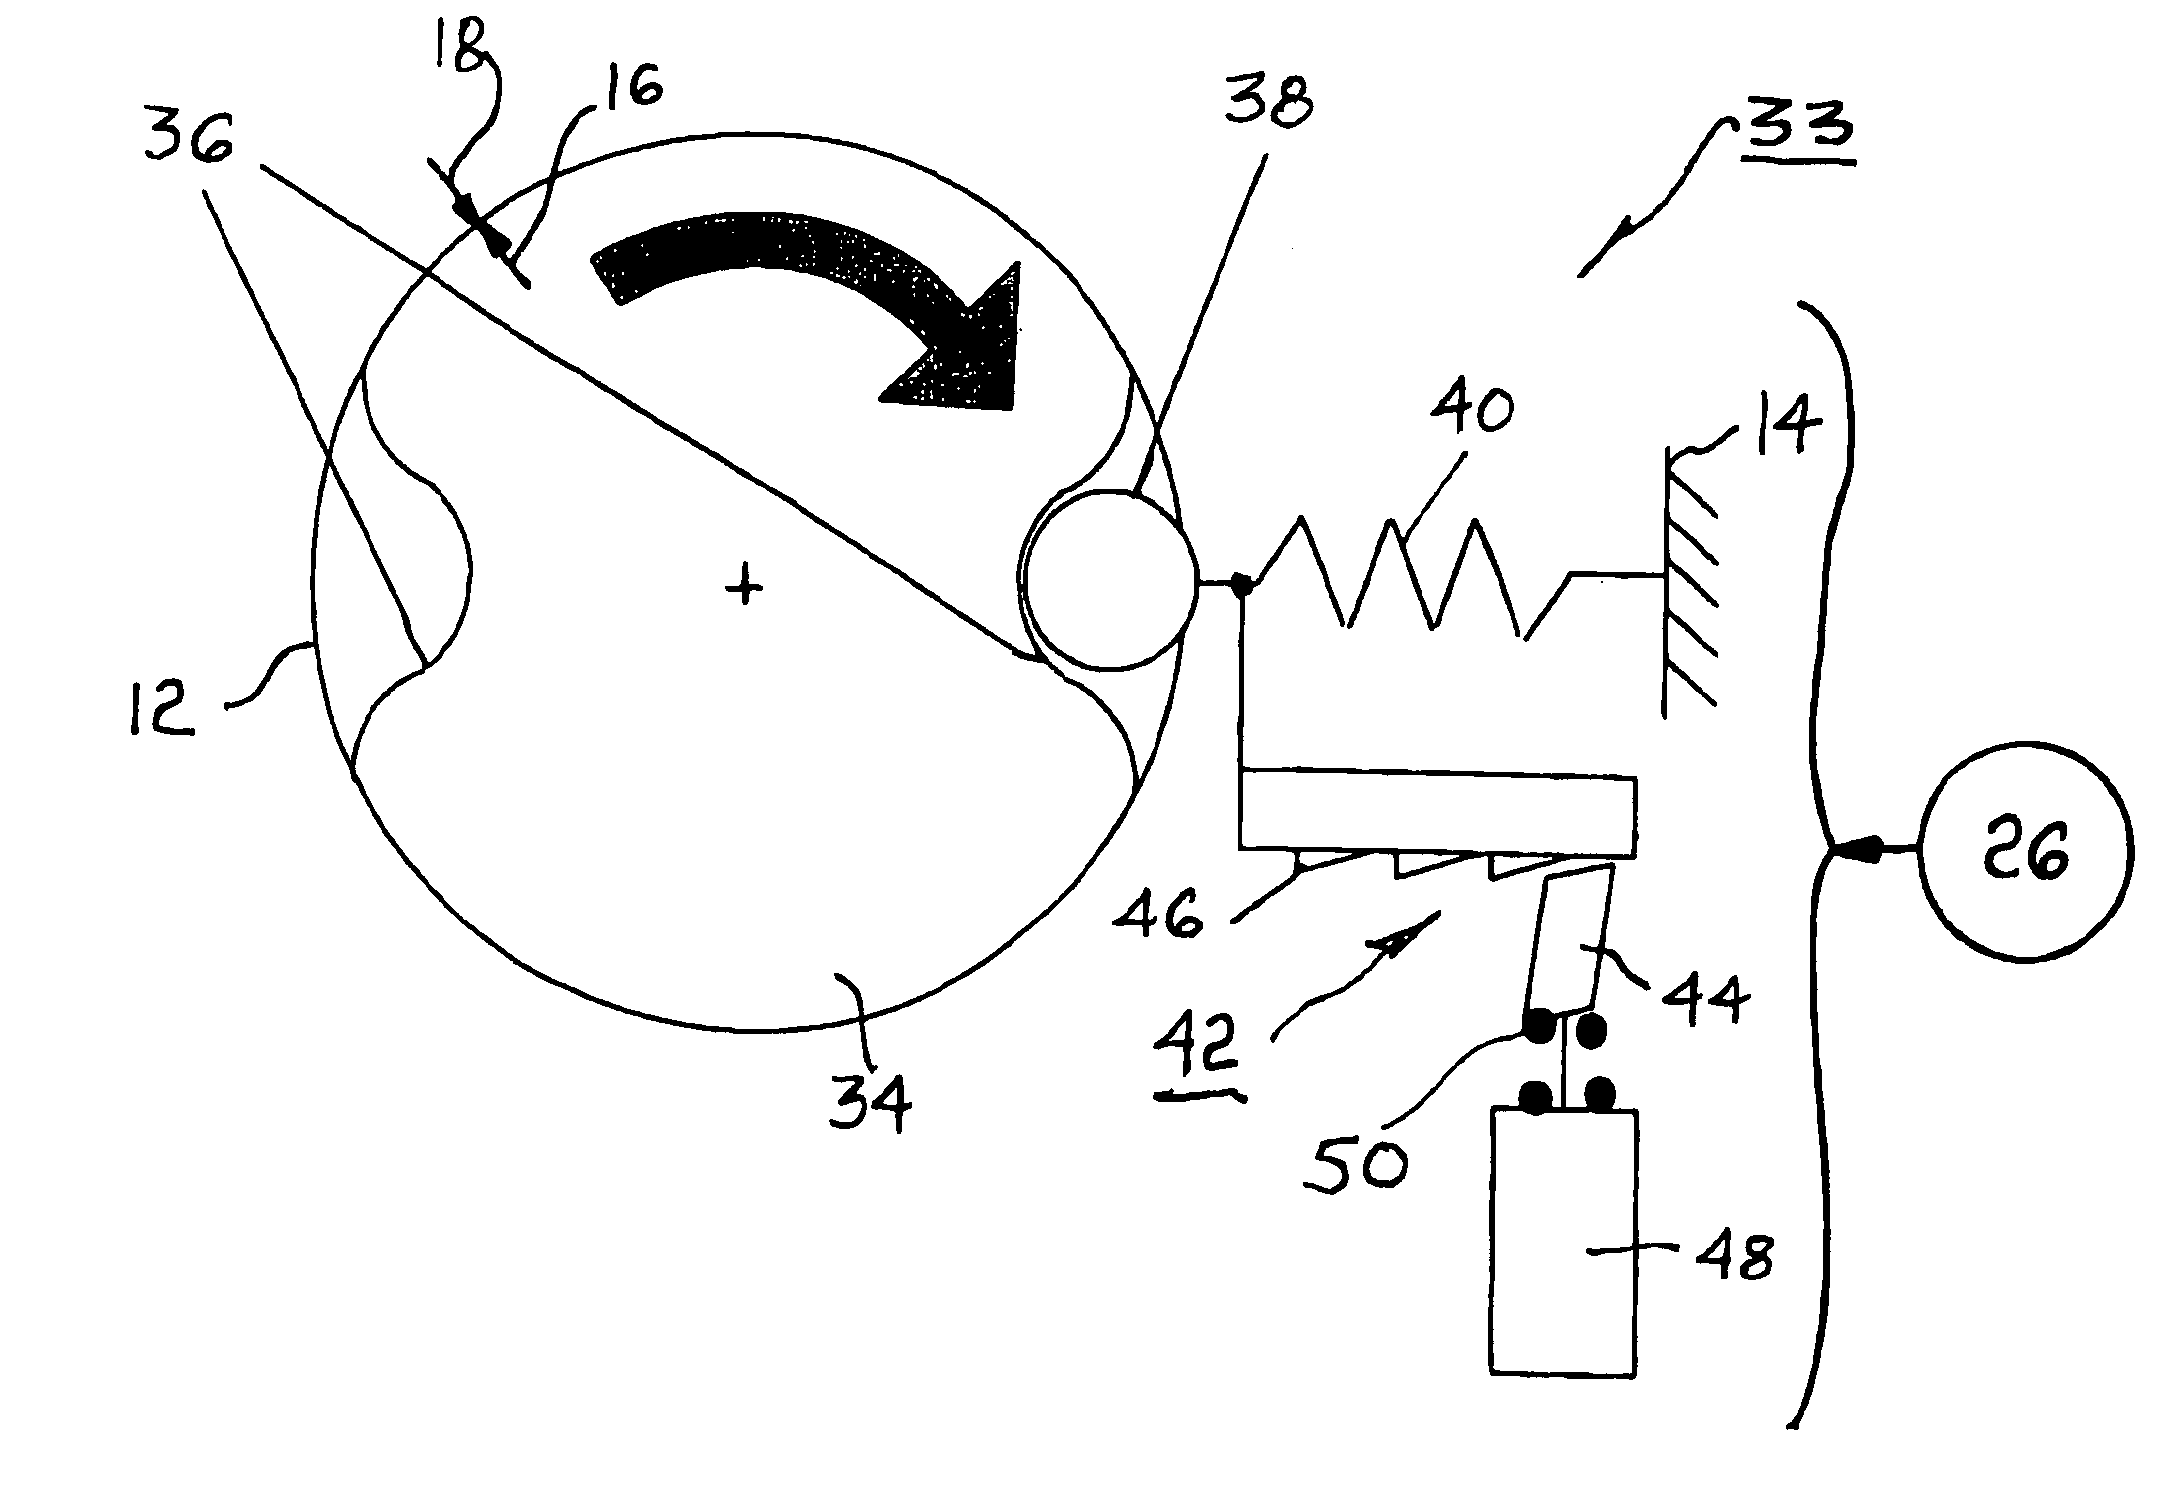 Controlled engine camshaft stopping position